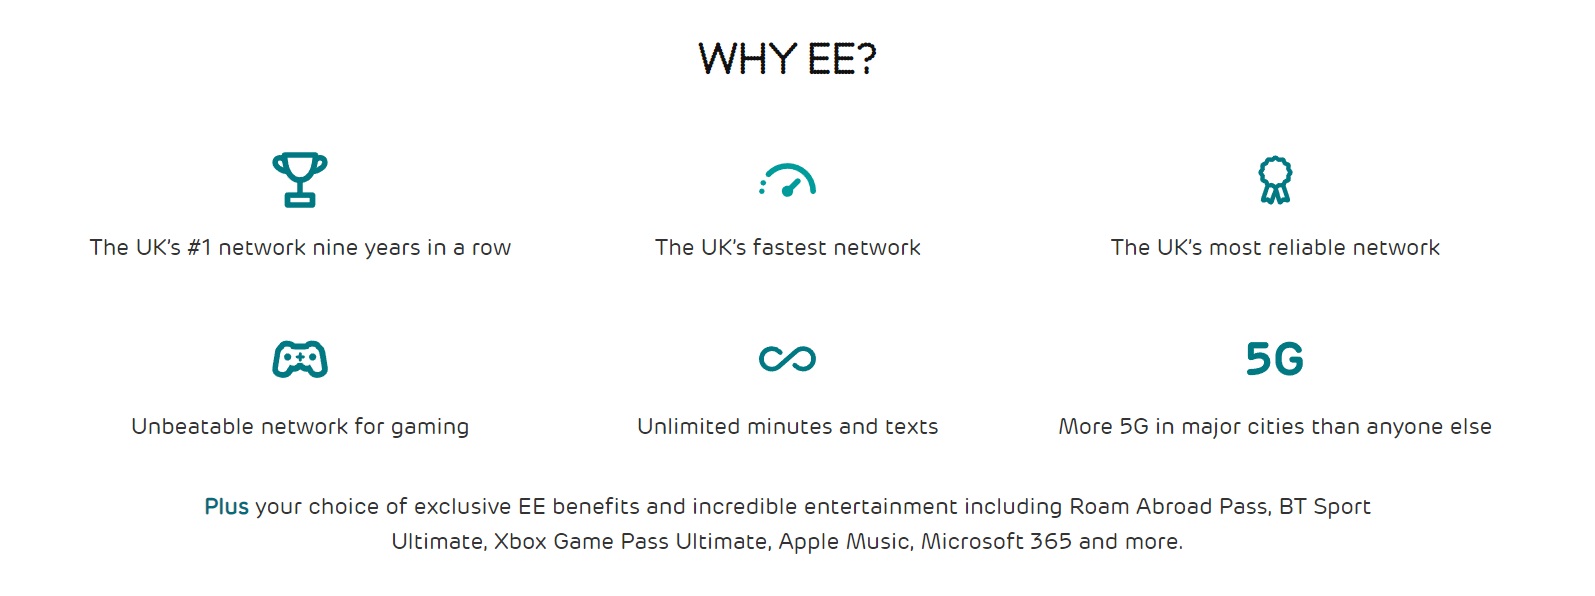 Why EE Mobile?